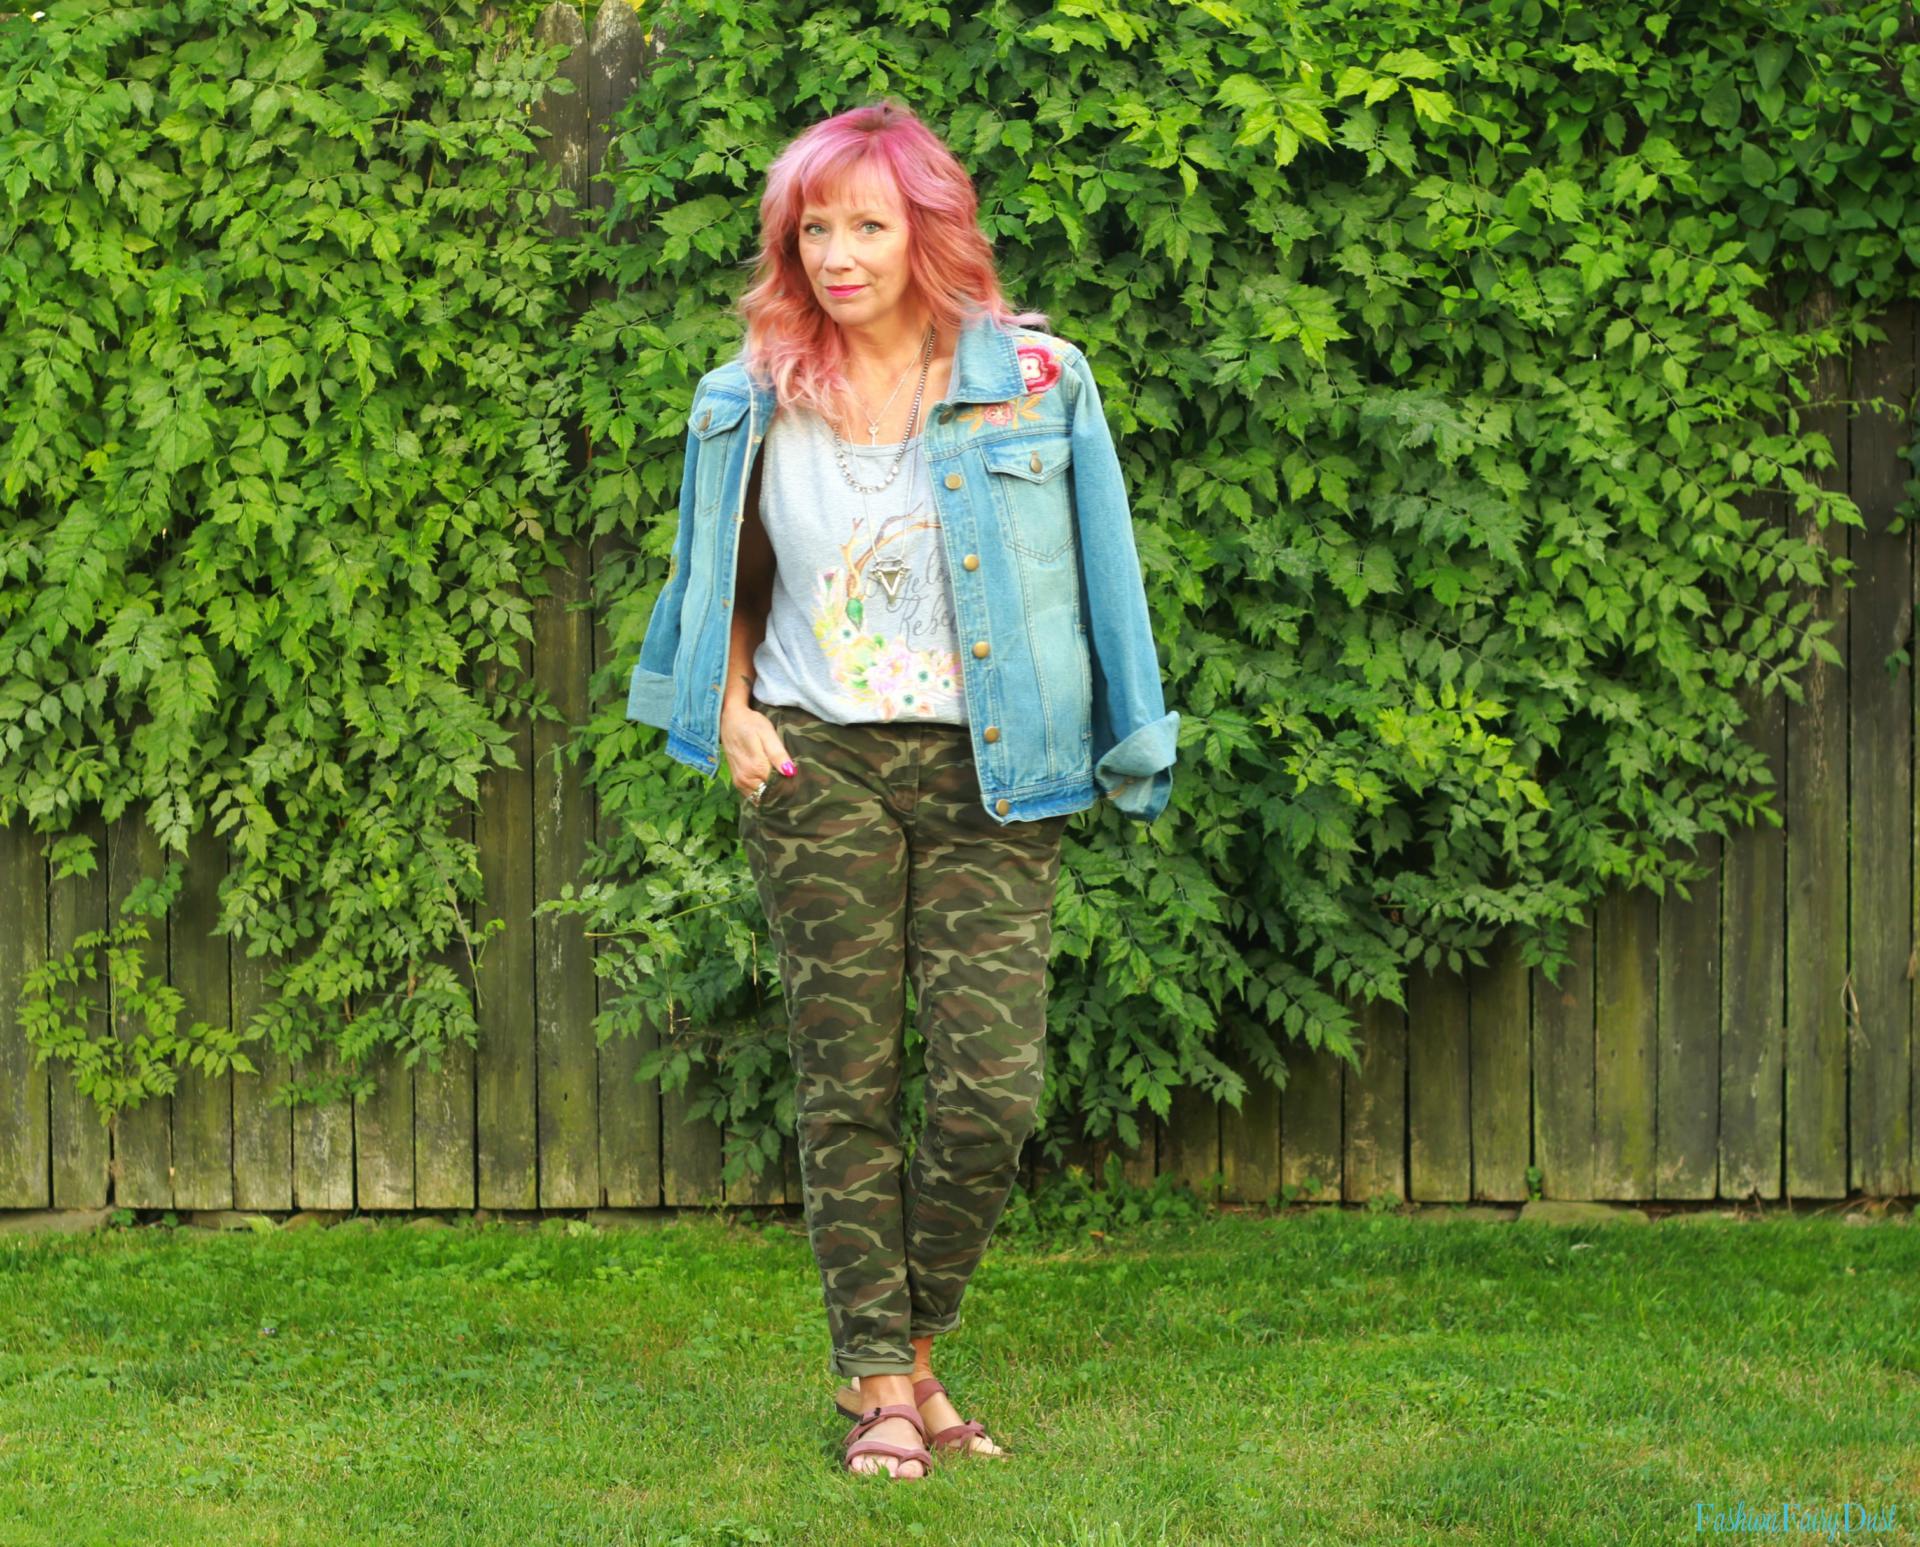 Camo pants, embroidered denim jacket and graphic tank top.